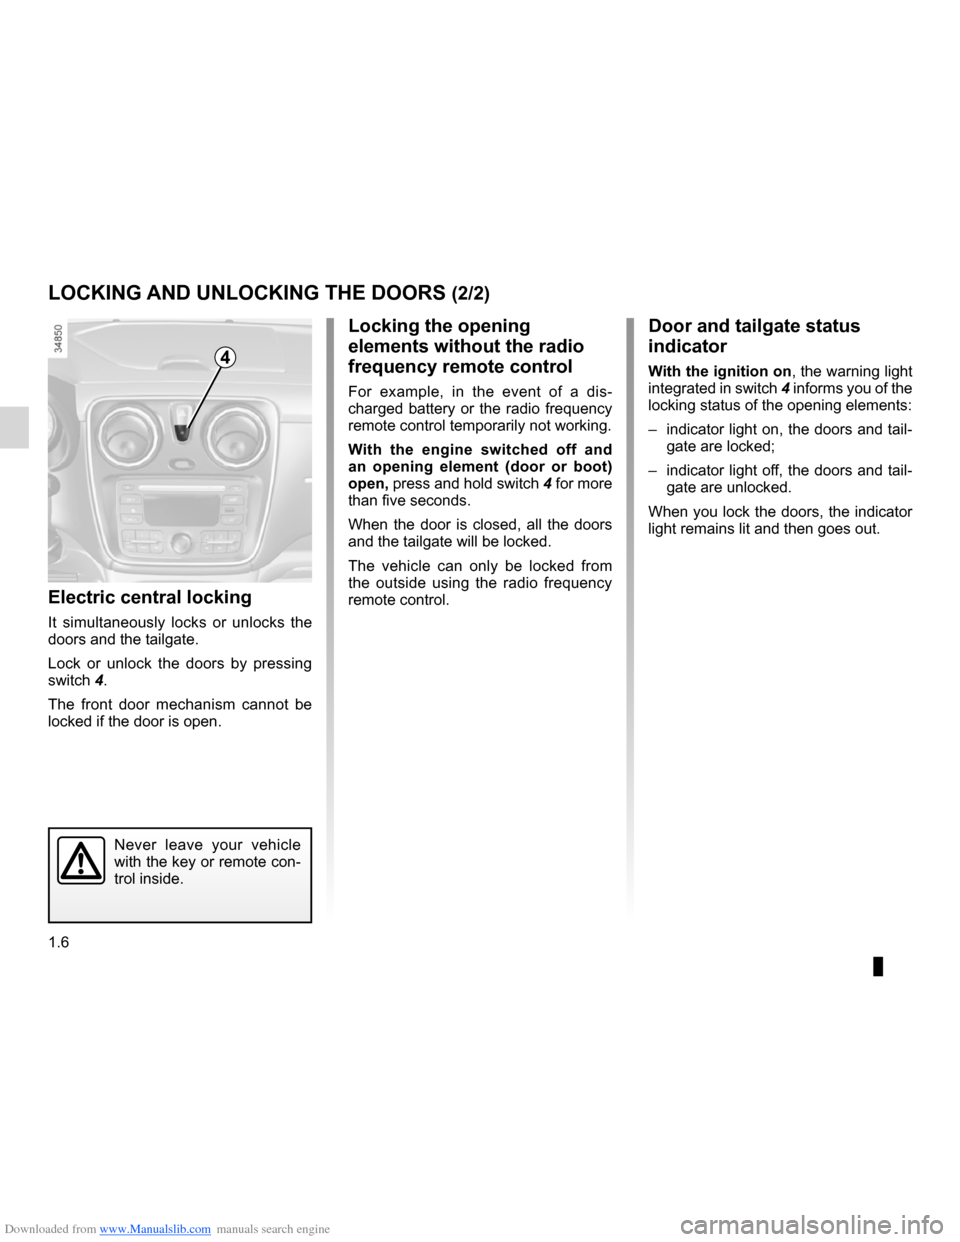 DACIA LODGY 2012 1.G User Guide Downloaded from www.Manualslib.com manuals search engine 1.6
ENG_UD26875_2
Verrouillage et déverrouillage des portes (X92 - Renault)
ENG_NU_975-3_X92_Dacia_1
LOCKING AND UNLOCKING THE DOORS (2/2)
Ele